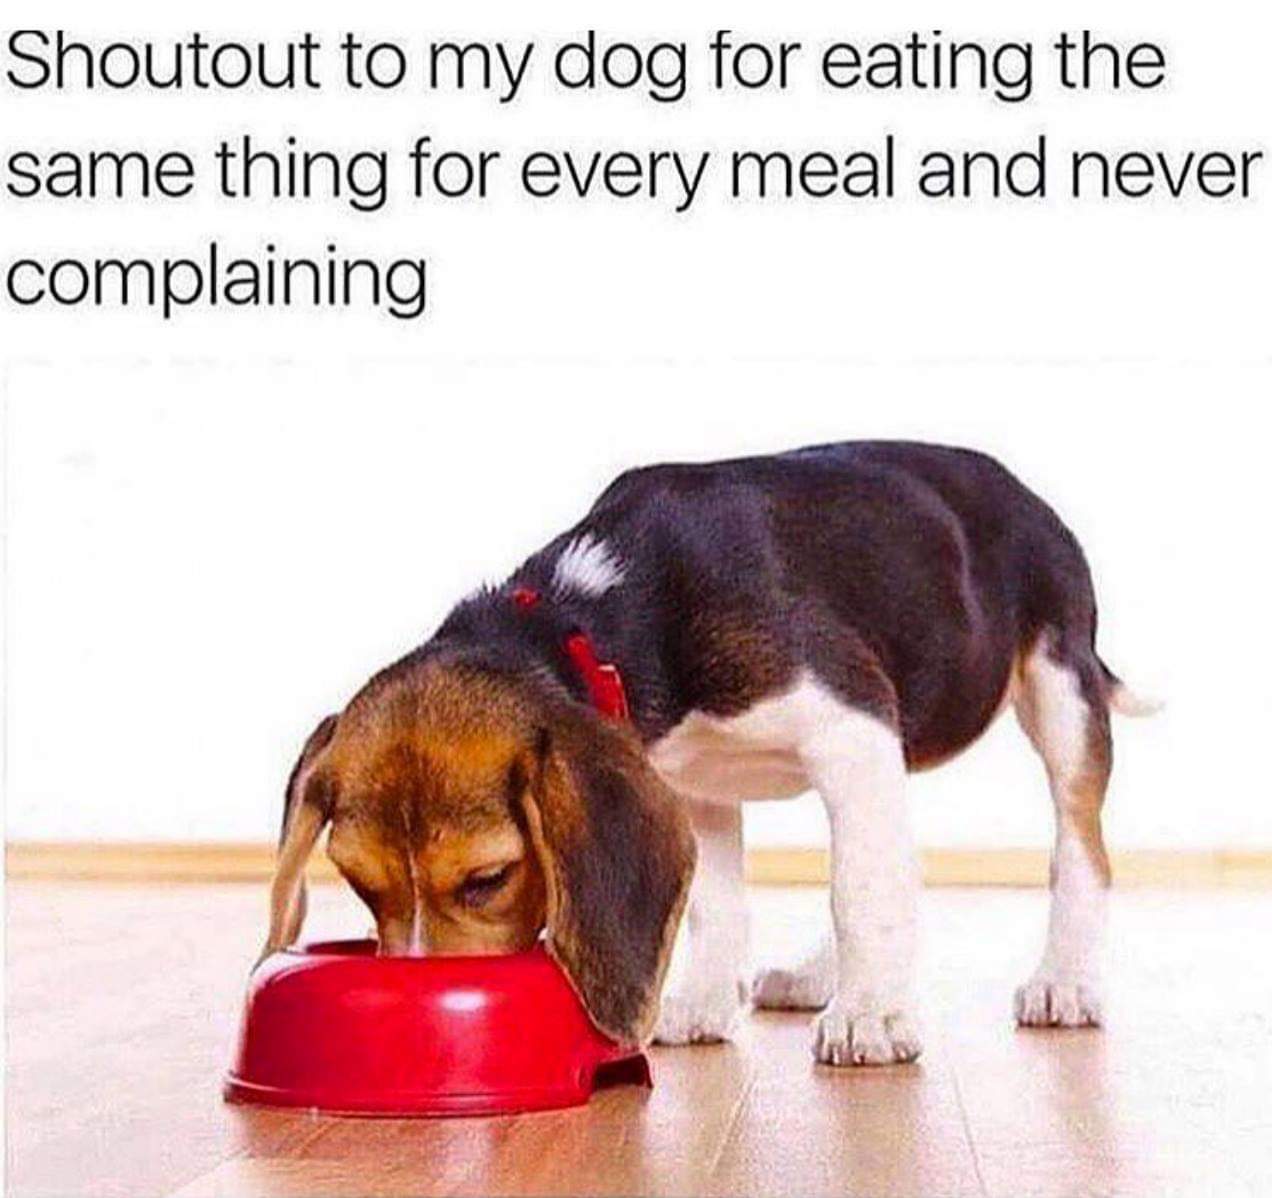 dog eating - Shoutout to my dog for eating the same thing for every meal and never complaining